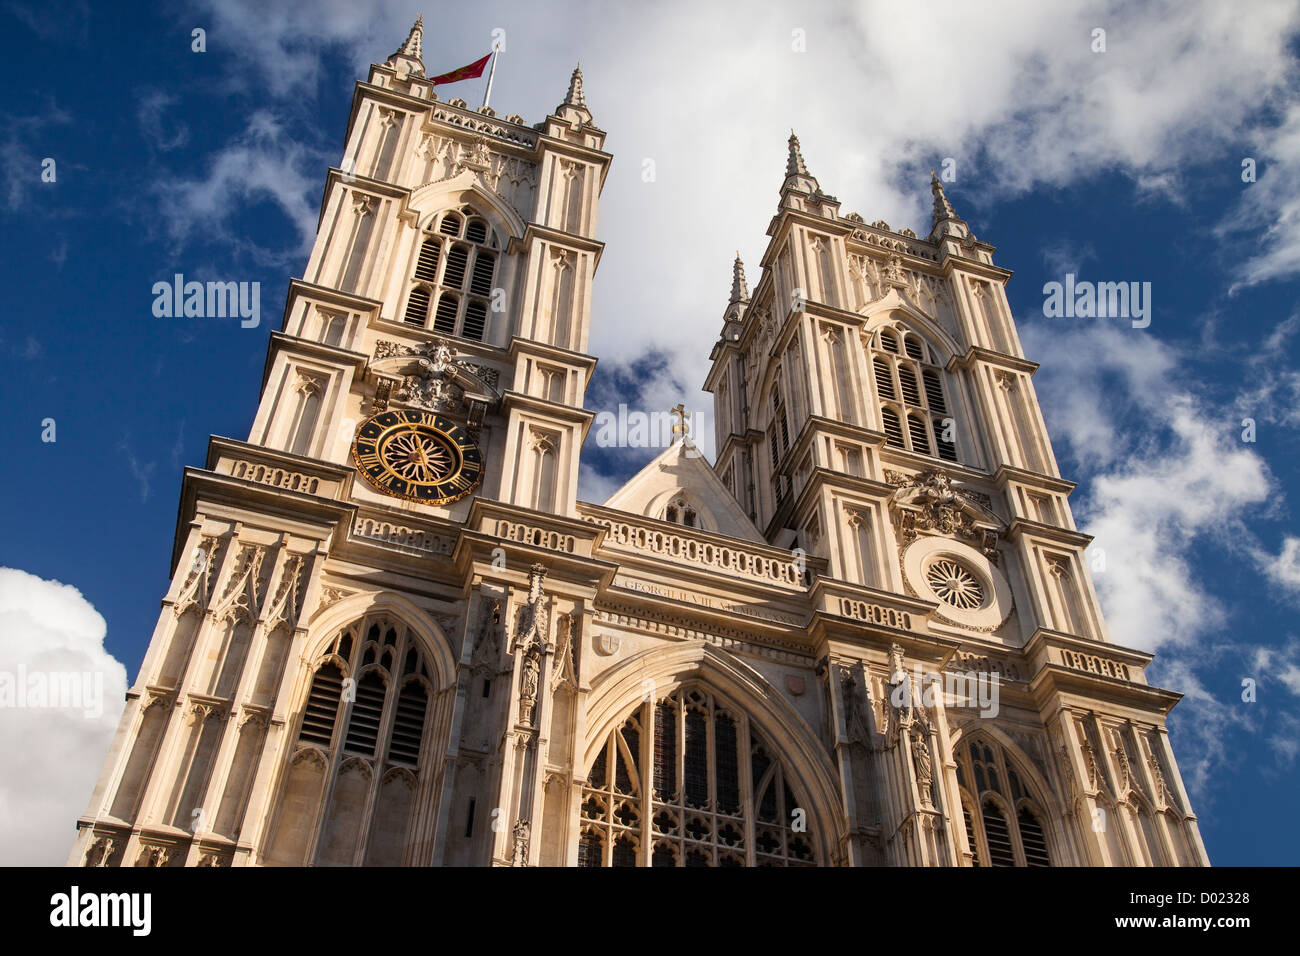 Front facade of Westminster Abbey, London England, UK Stock Photo